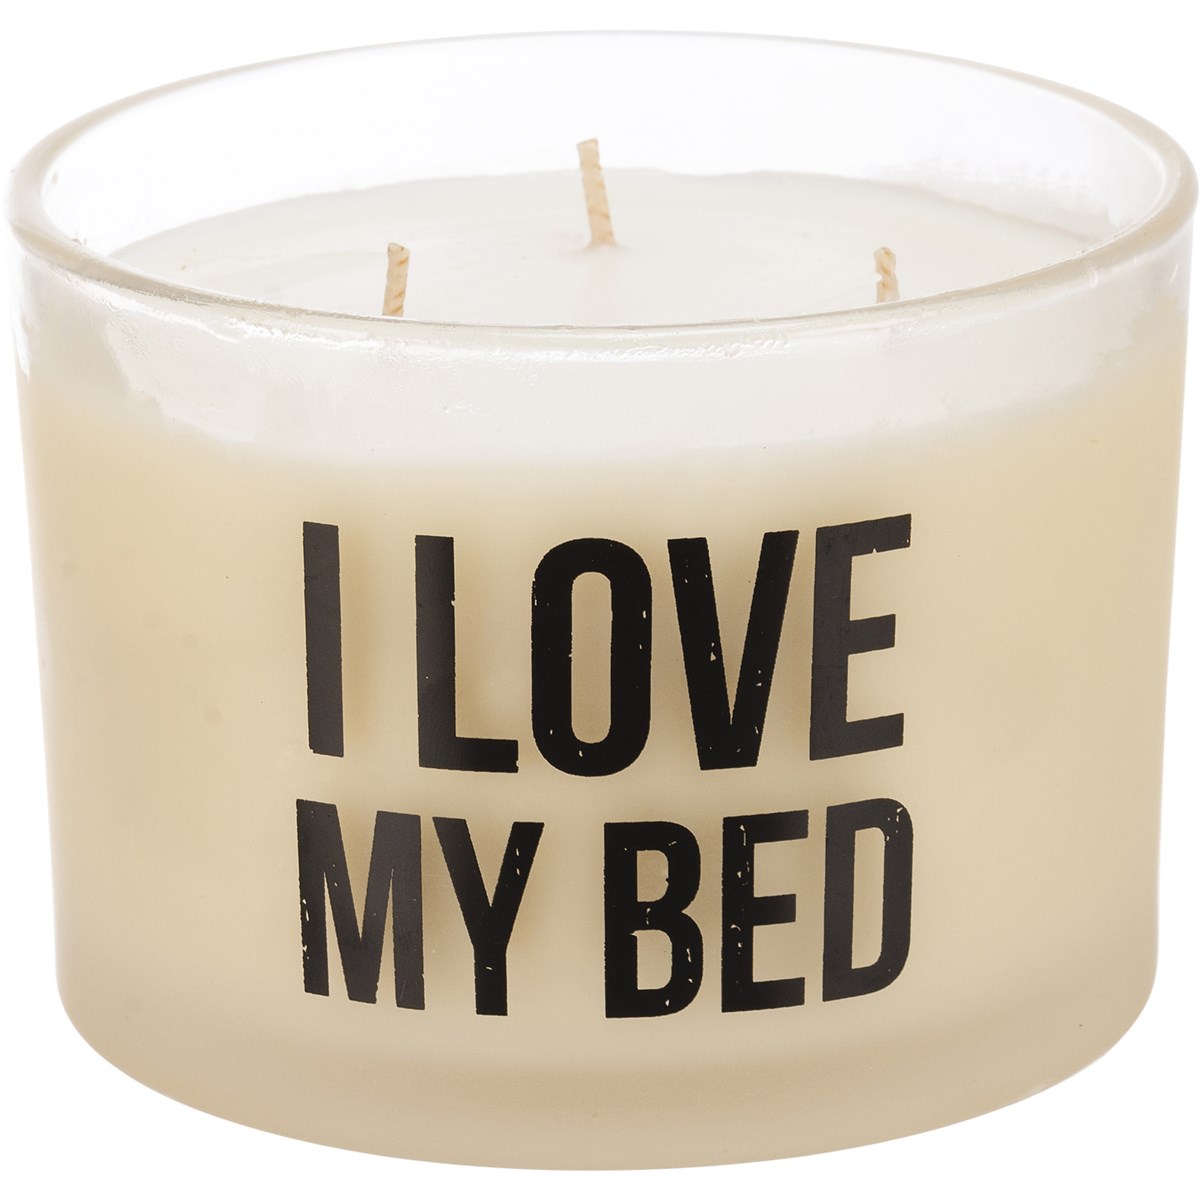 I Love My Bed Candle - Soy Wax, Glass, Cotton